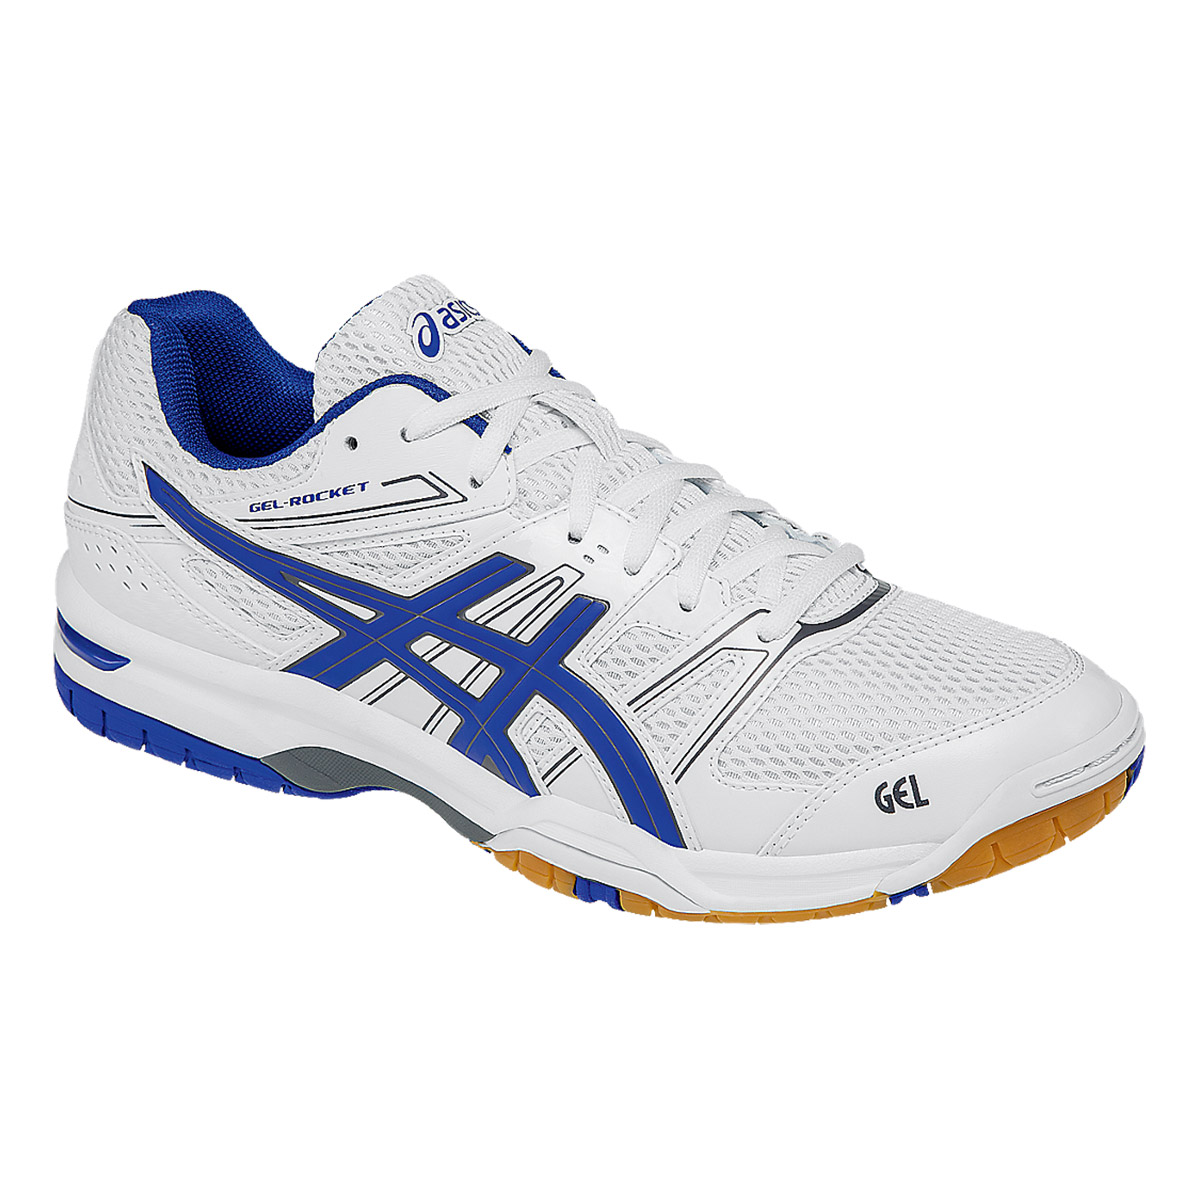 asics shoes sale in india